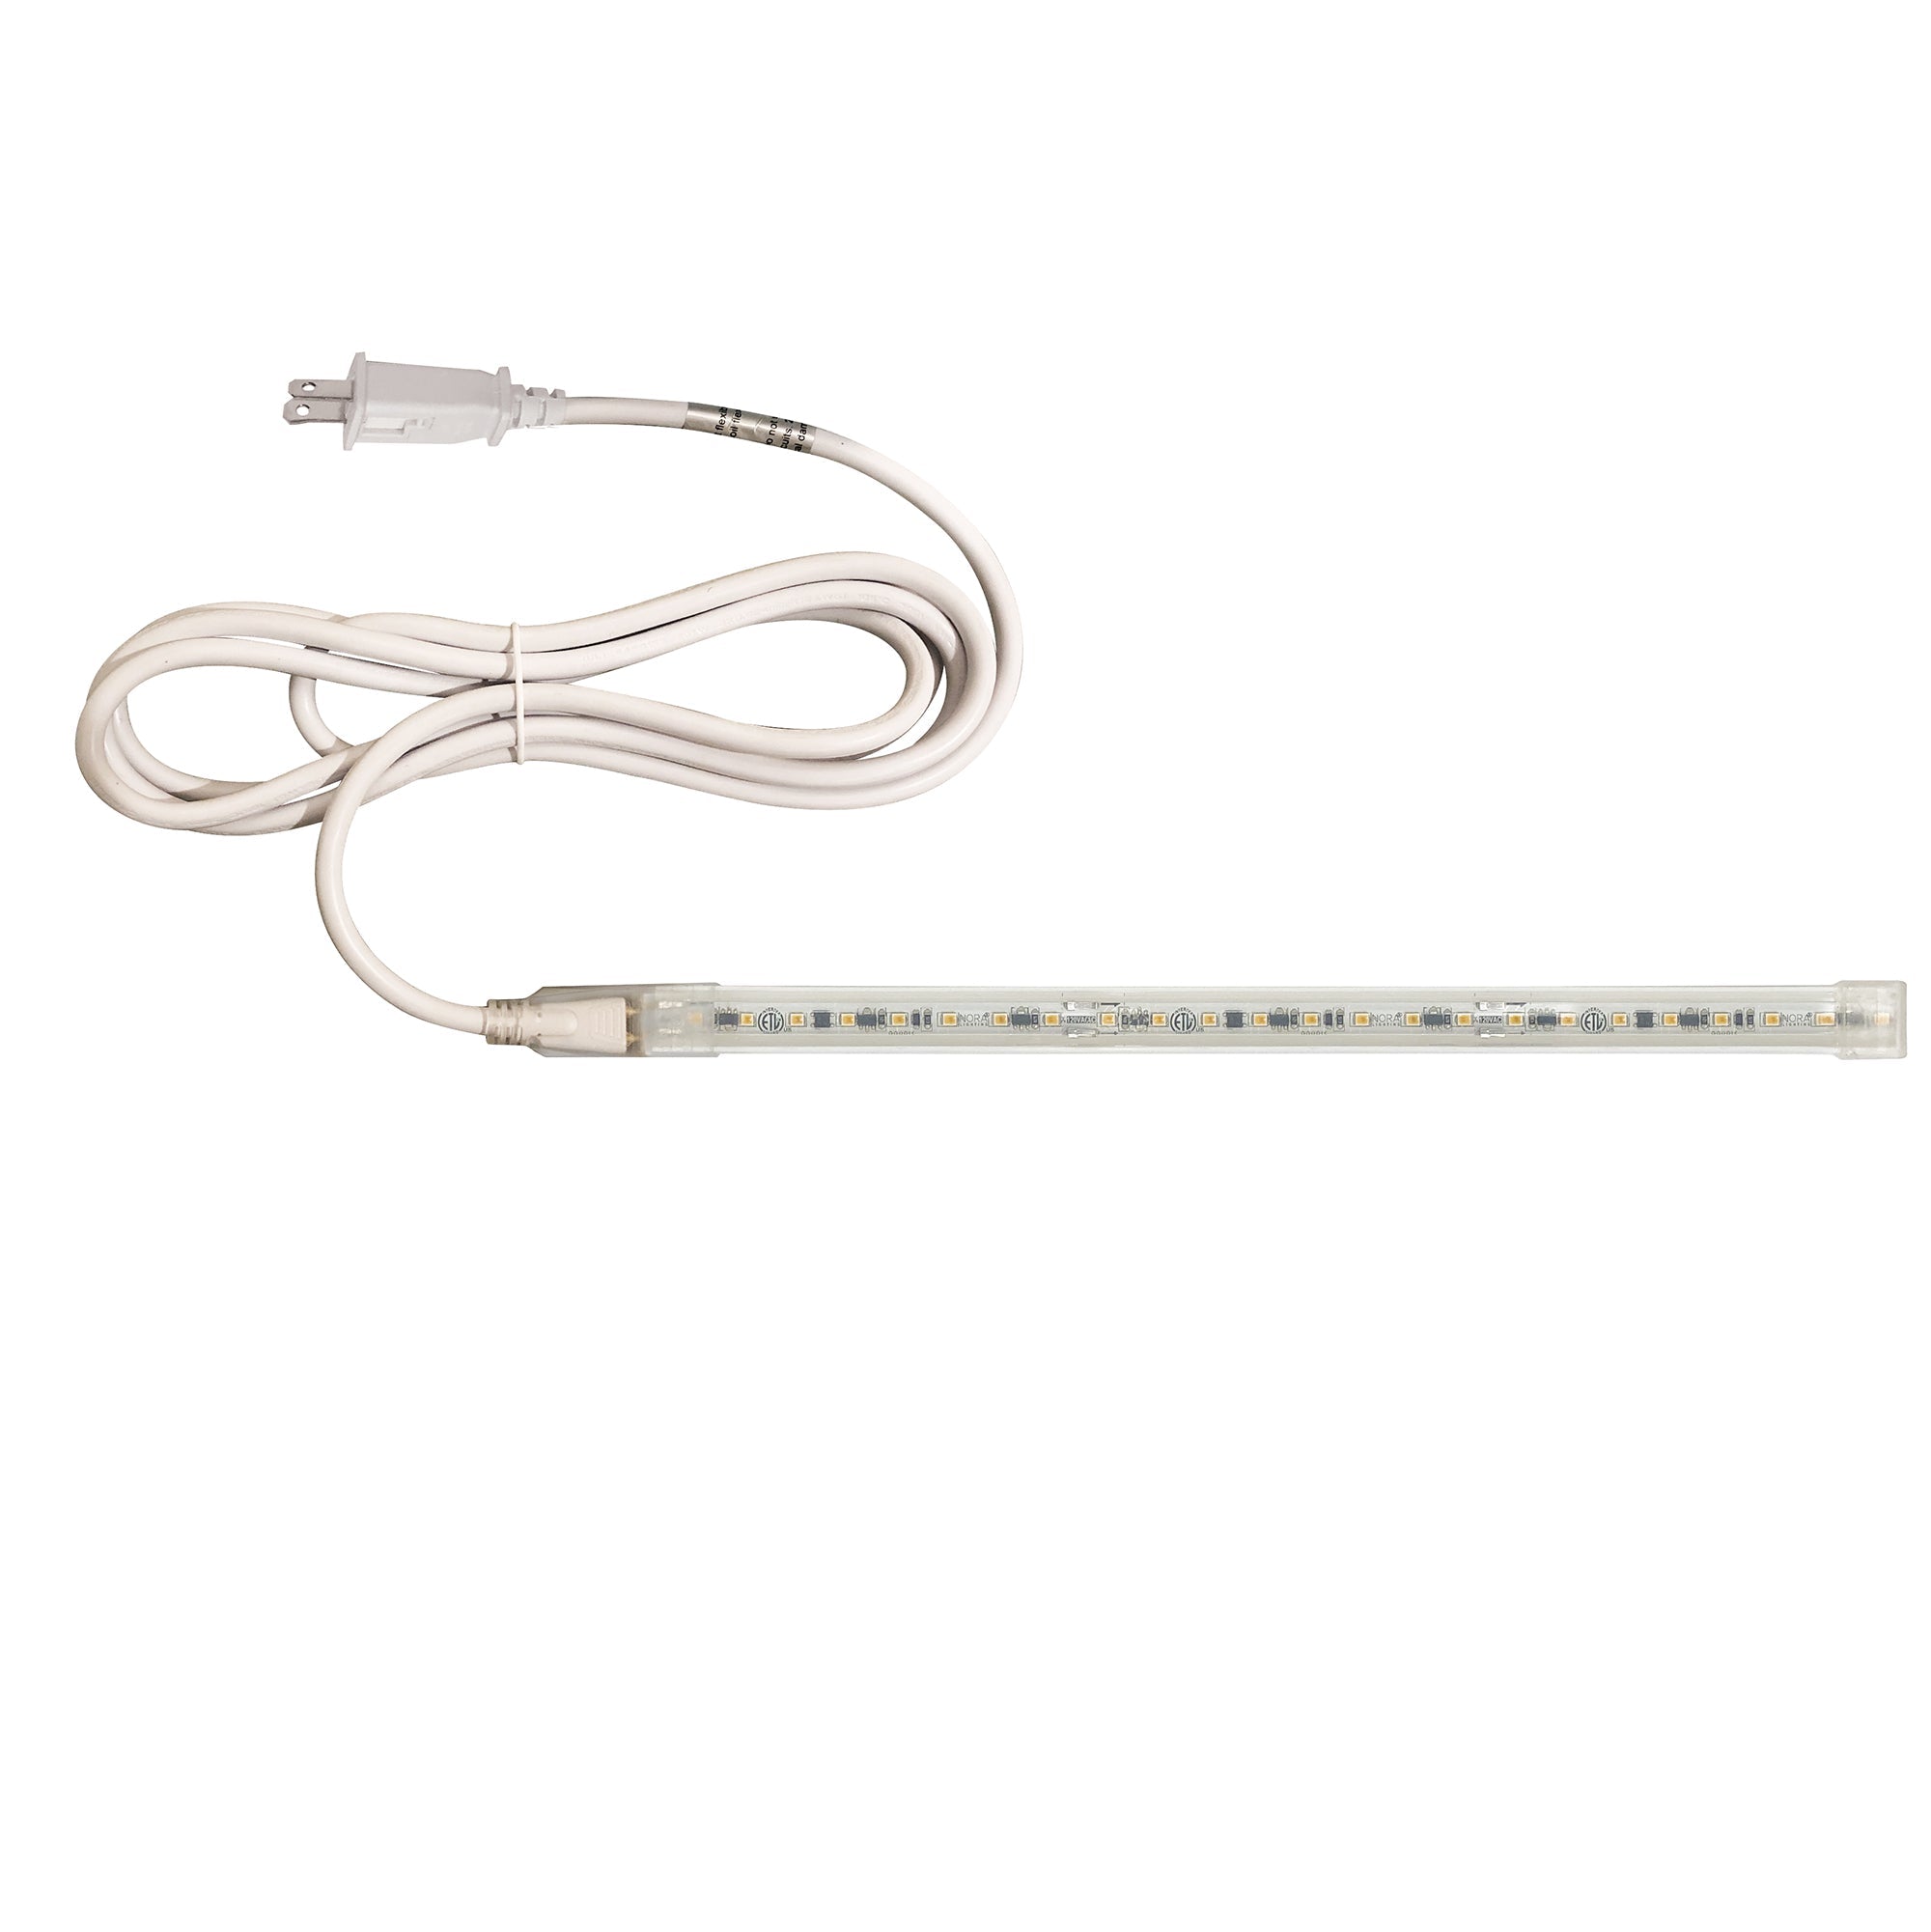 Nora Lighting NUTP13-W8-12-930/CP - Accent / Undercabinet - Custom Cut 8-ft 120V Continuous LED Tape Light, 330lm / 3.6W per foot, 3000K, w/ Mounting Clips and 8' Cord & Plug